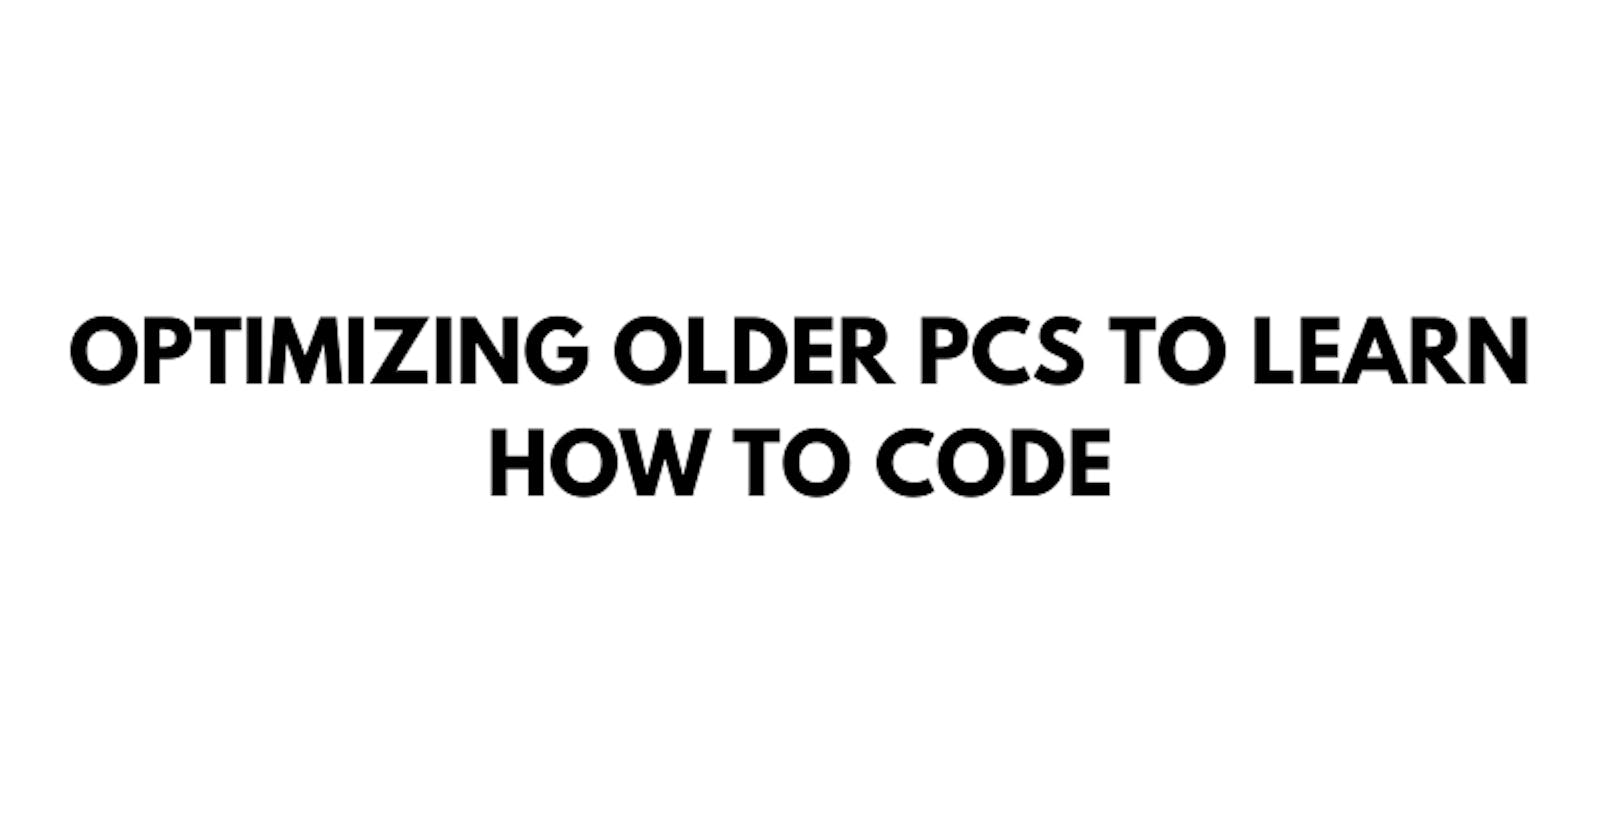 Optimizing Older PCs to Learn How to Code